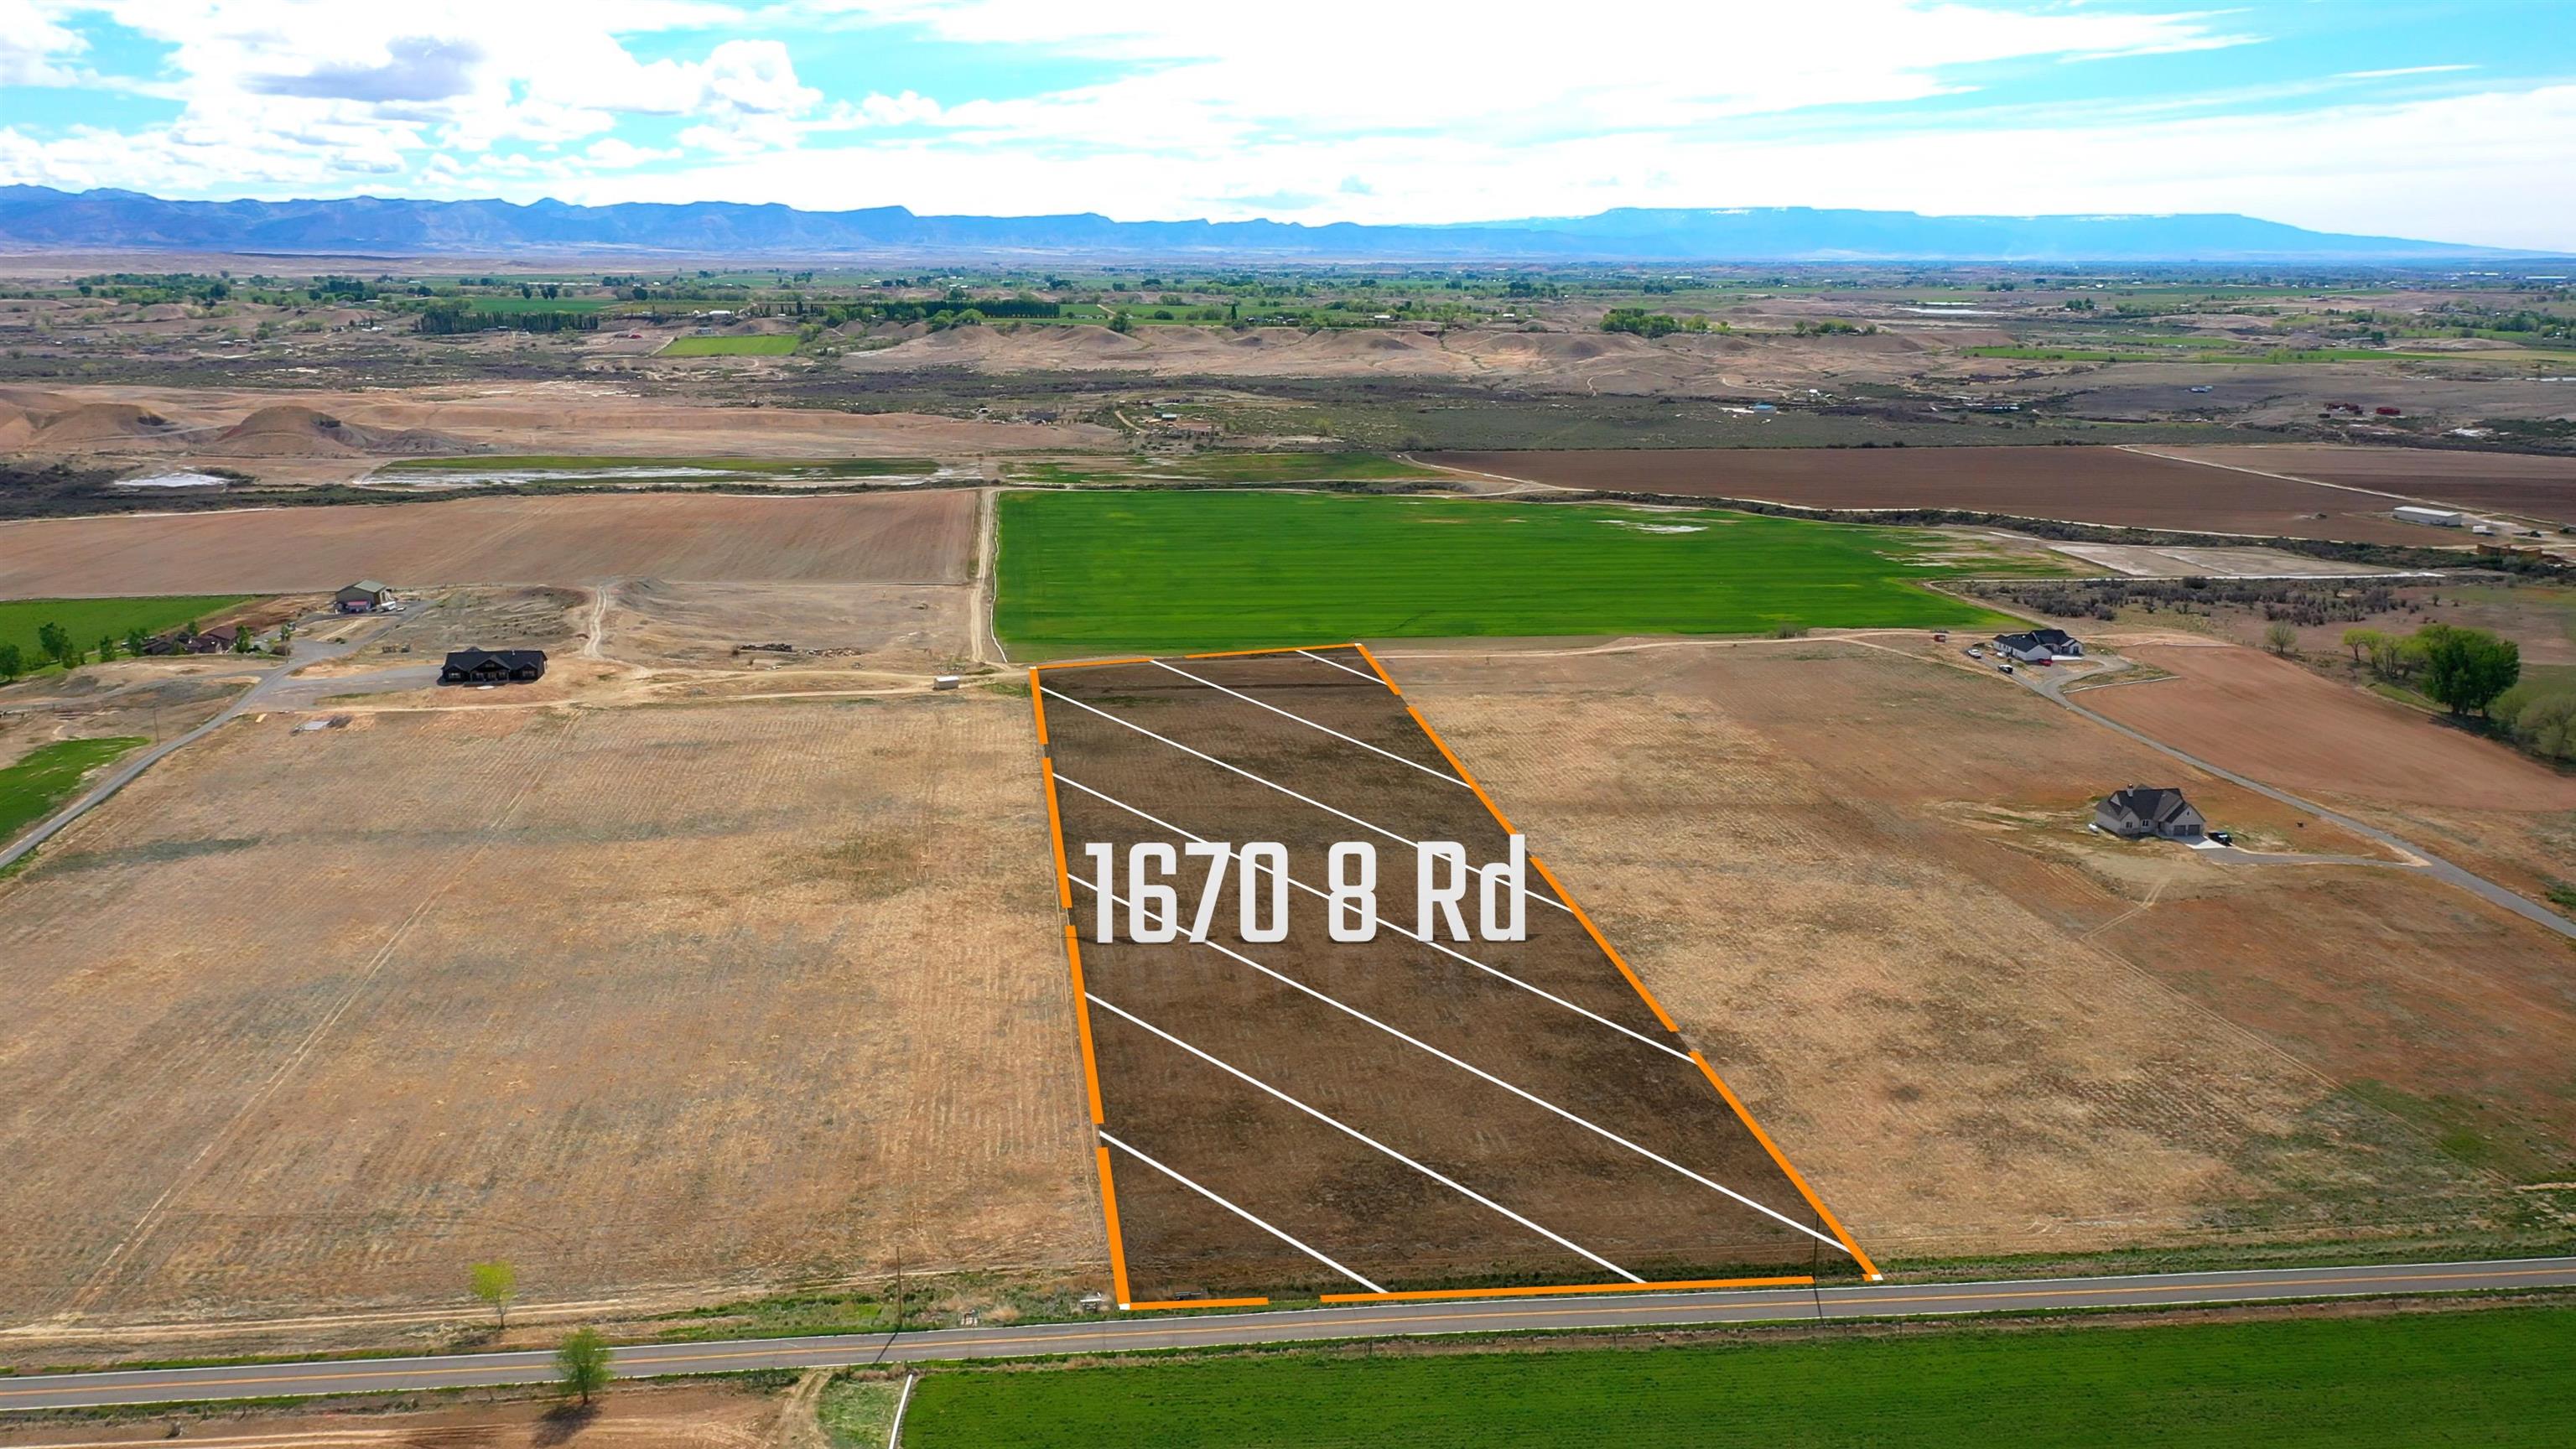 Been looking for that perfect spot with the most amazing 360-degree views of the Co. National Monument, the Bookcliffs, and the Grand Mesa to build your dream home? How about 9.53 acres with irrigation rights through the HOA just north of Hwy 6&50 to do just that. Easy to access, this vacant lot is ready for you to develop however you dream! This property is just waiting for you and all your ideas, so bring your family and your farm animals, build that barn or shop you've always wanted and enjoy country living at its finest!